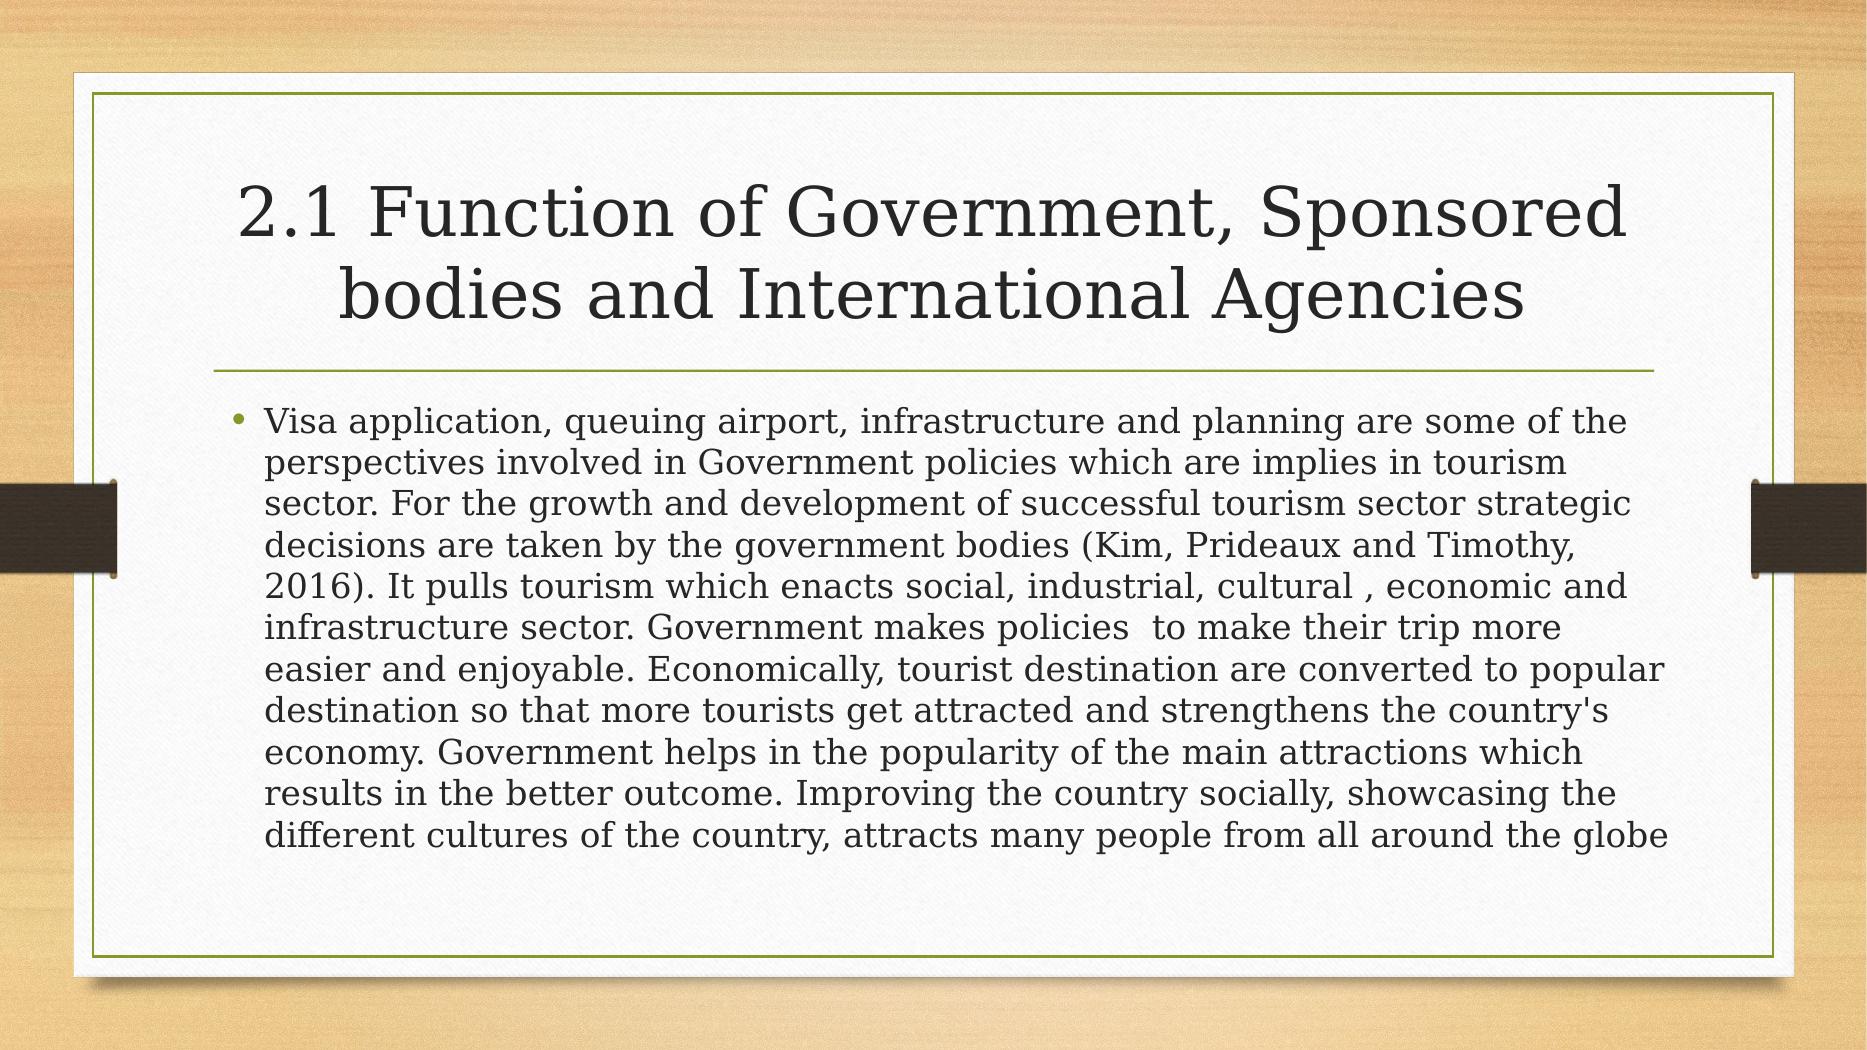 Function of Government, Sponsored bodies and International Agencies in Travel and Tourism Sector_2